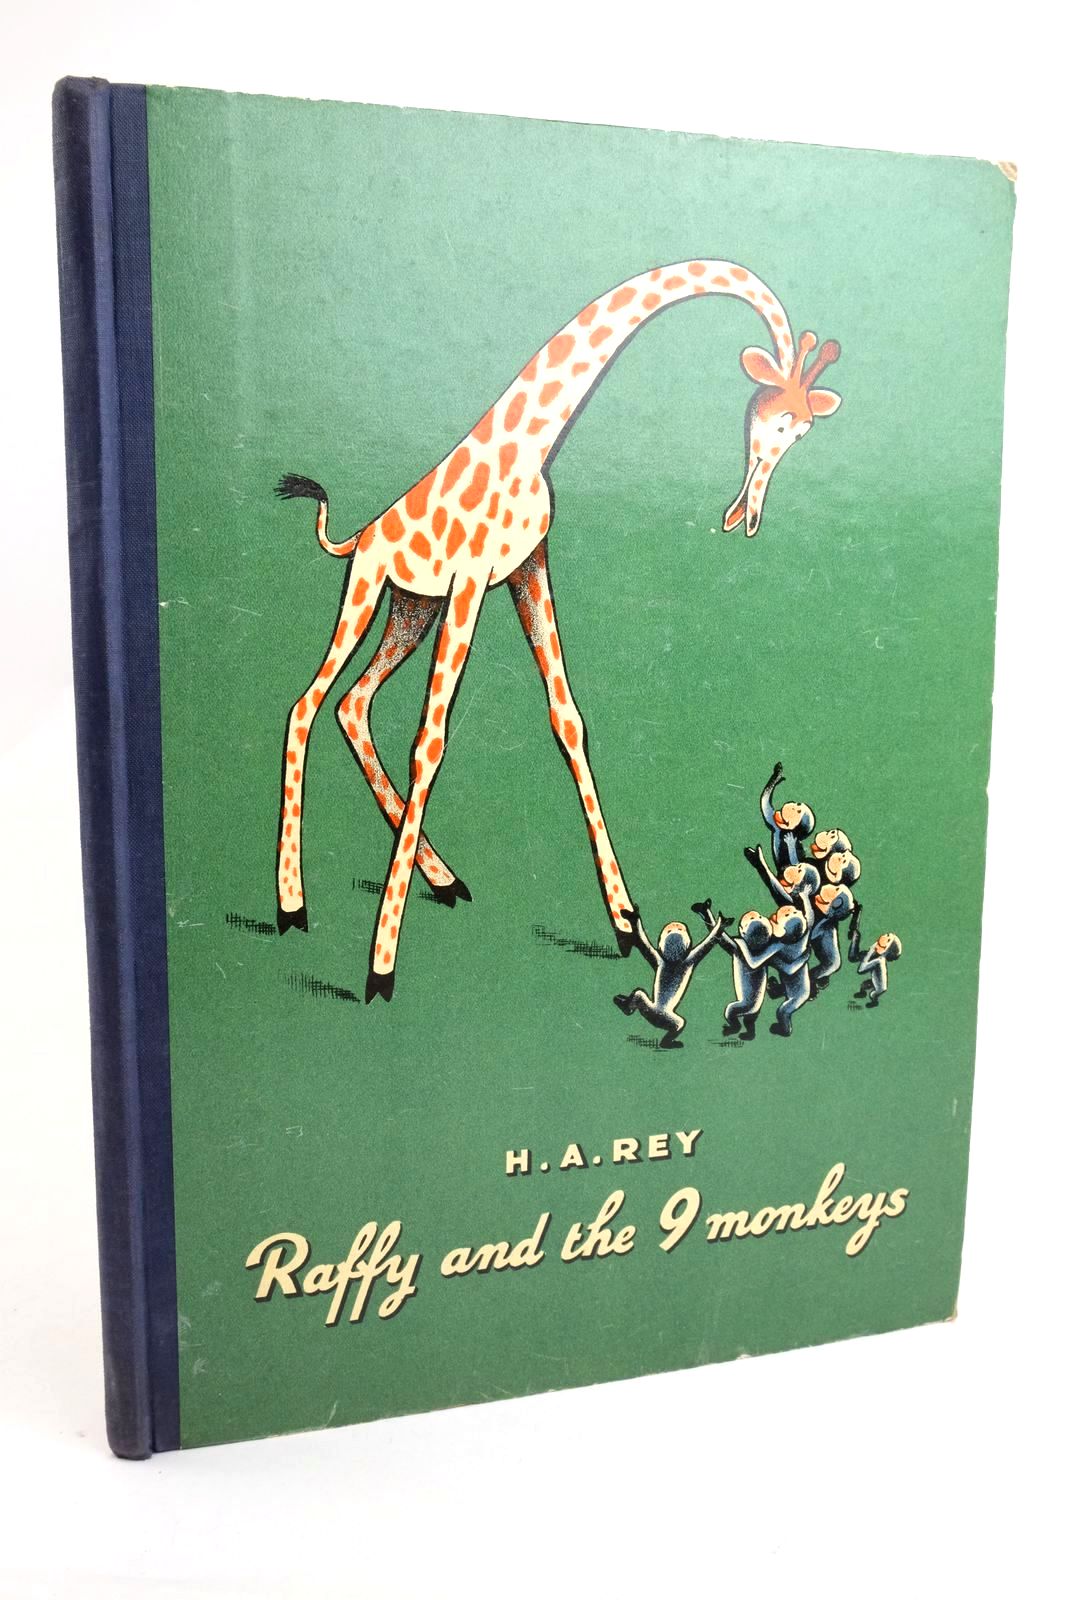 Photo of RAFFY AND THE 9 MONKEYS written by Rey, H.A. illustrated by Rey, H.A. published by Chatto &amp; Windus (STOCK CODE: 1322251)  for sale by Stella & Rose's Books